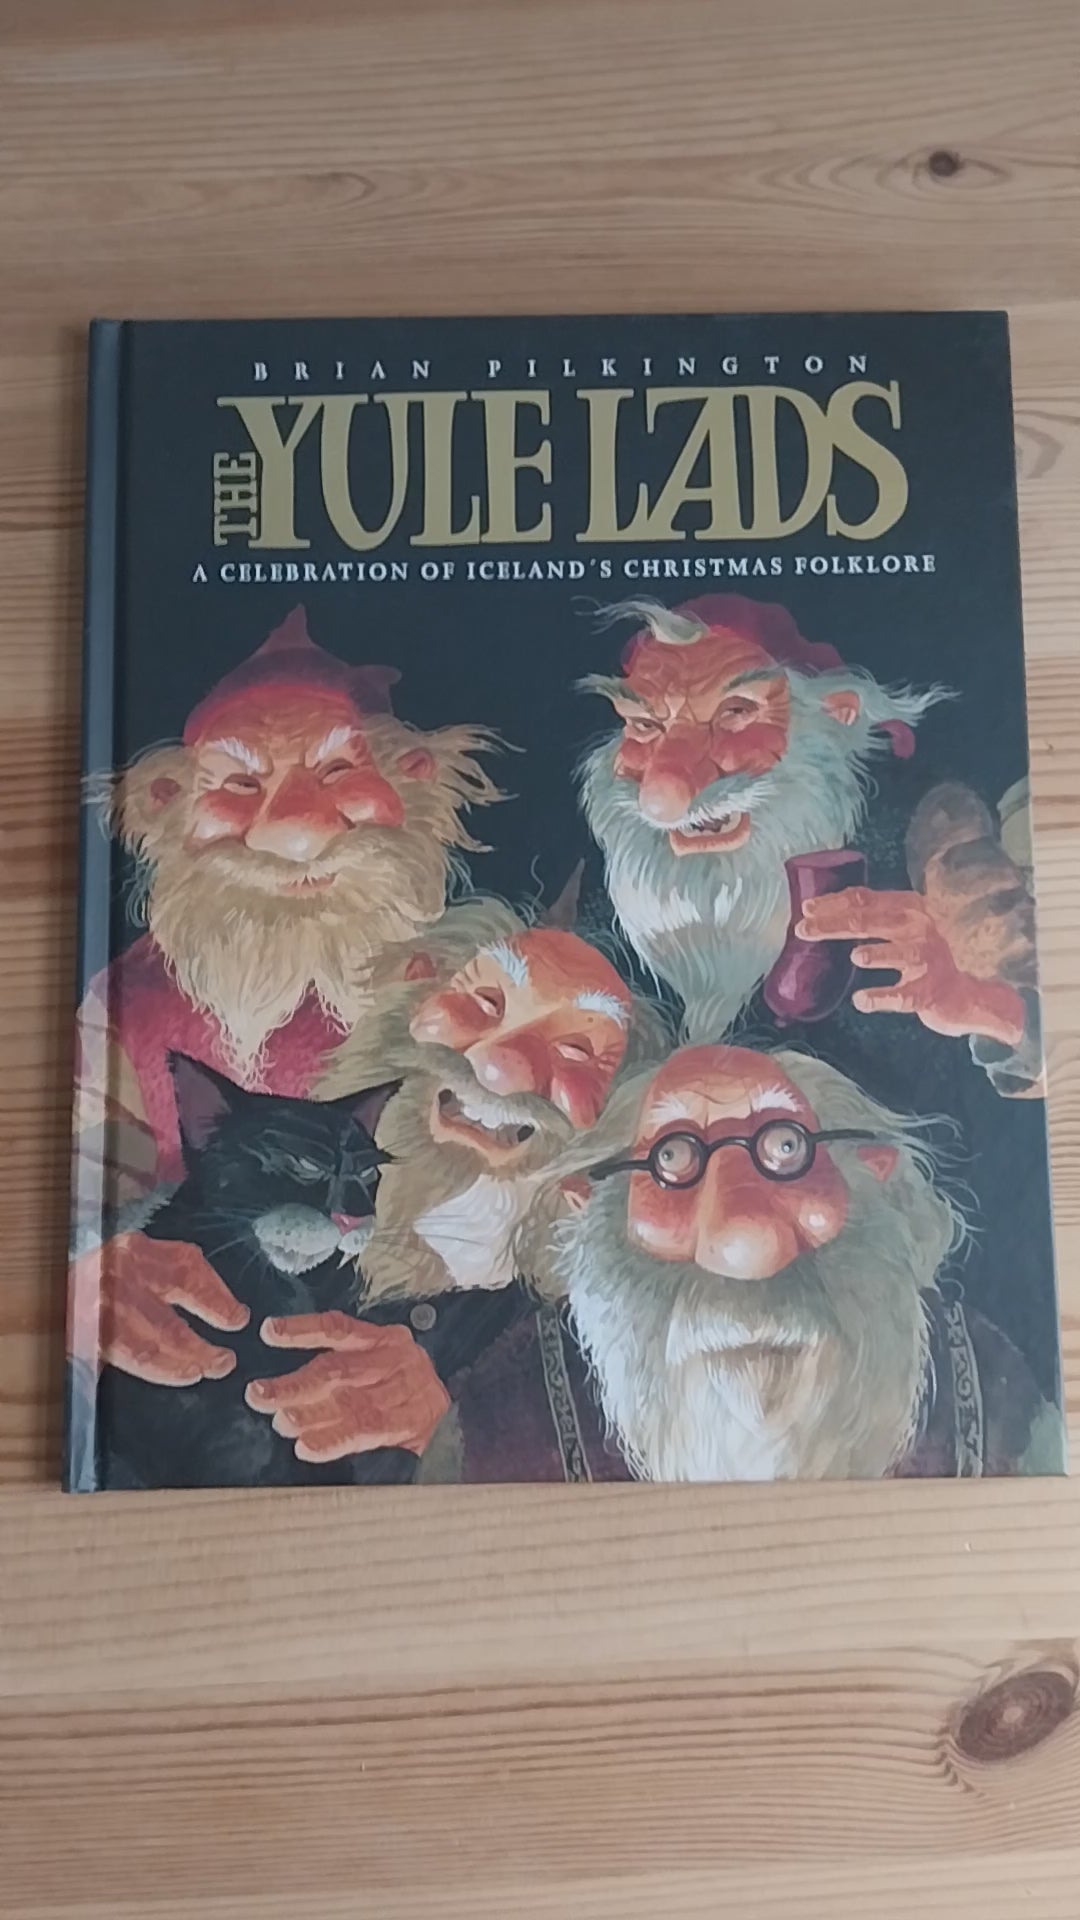 The Yule lads